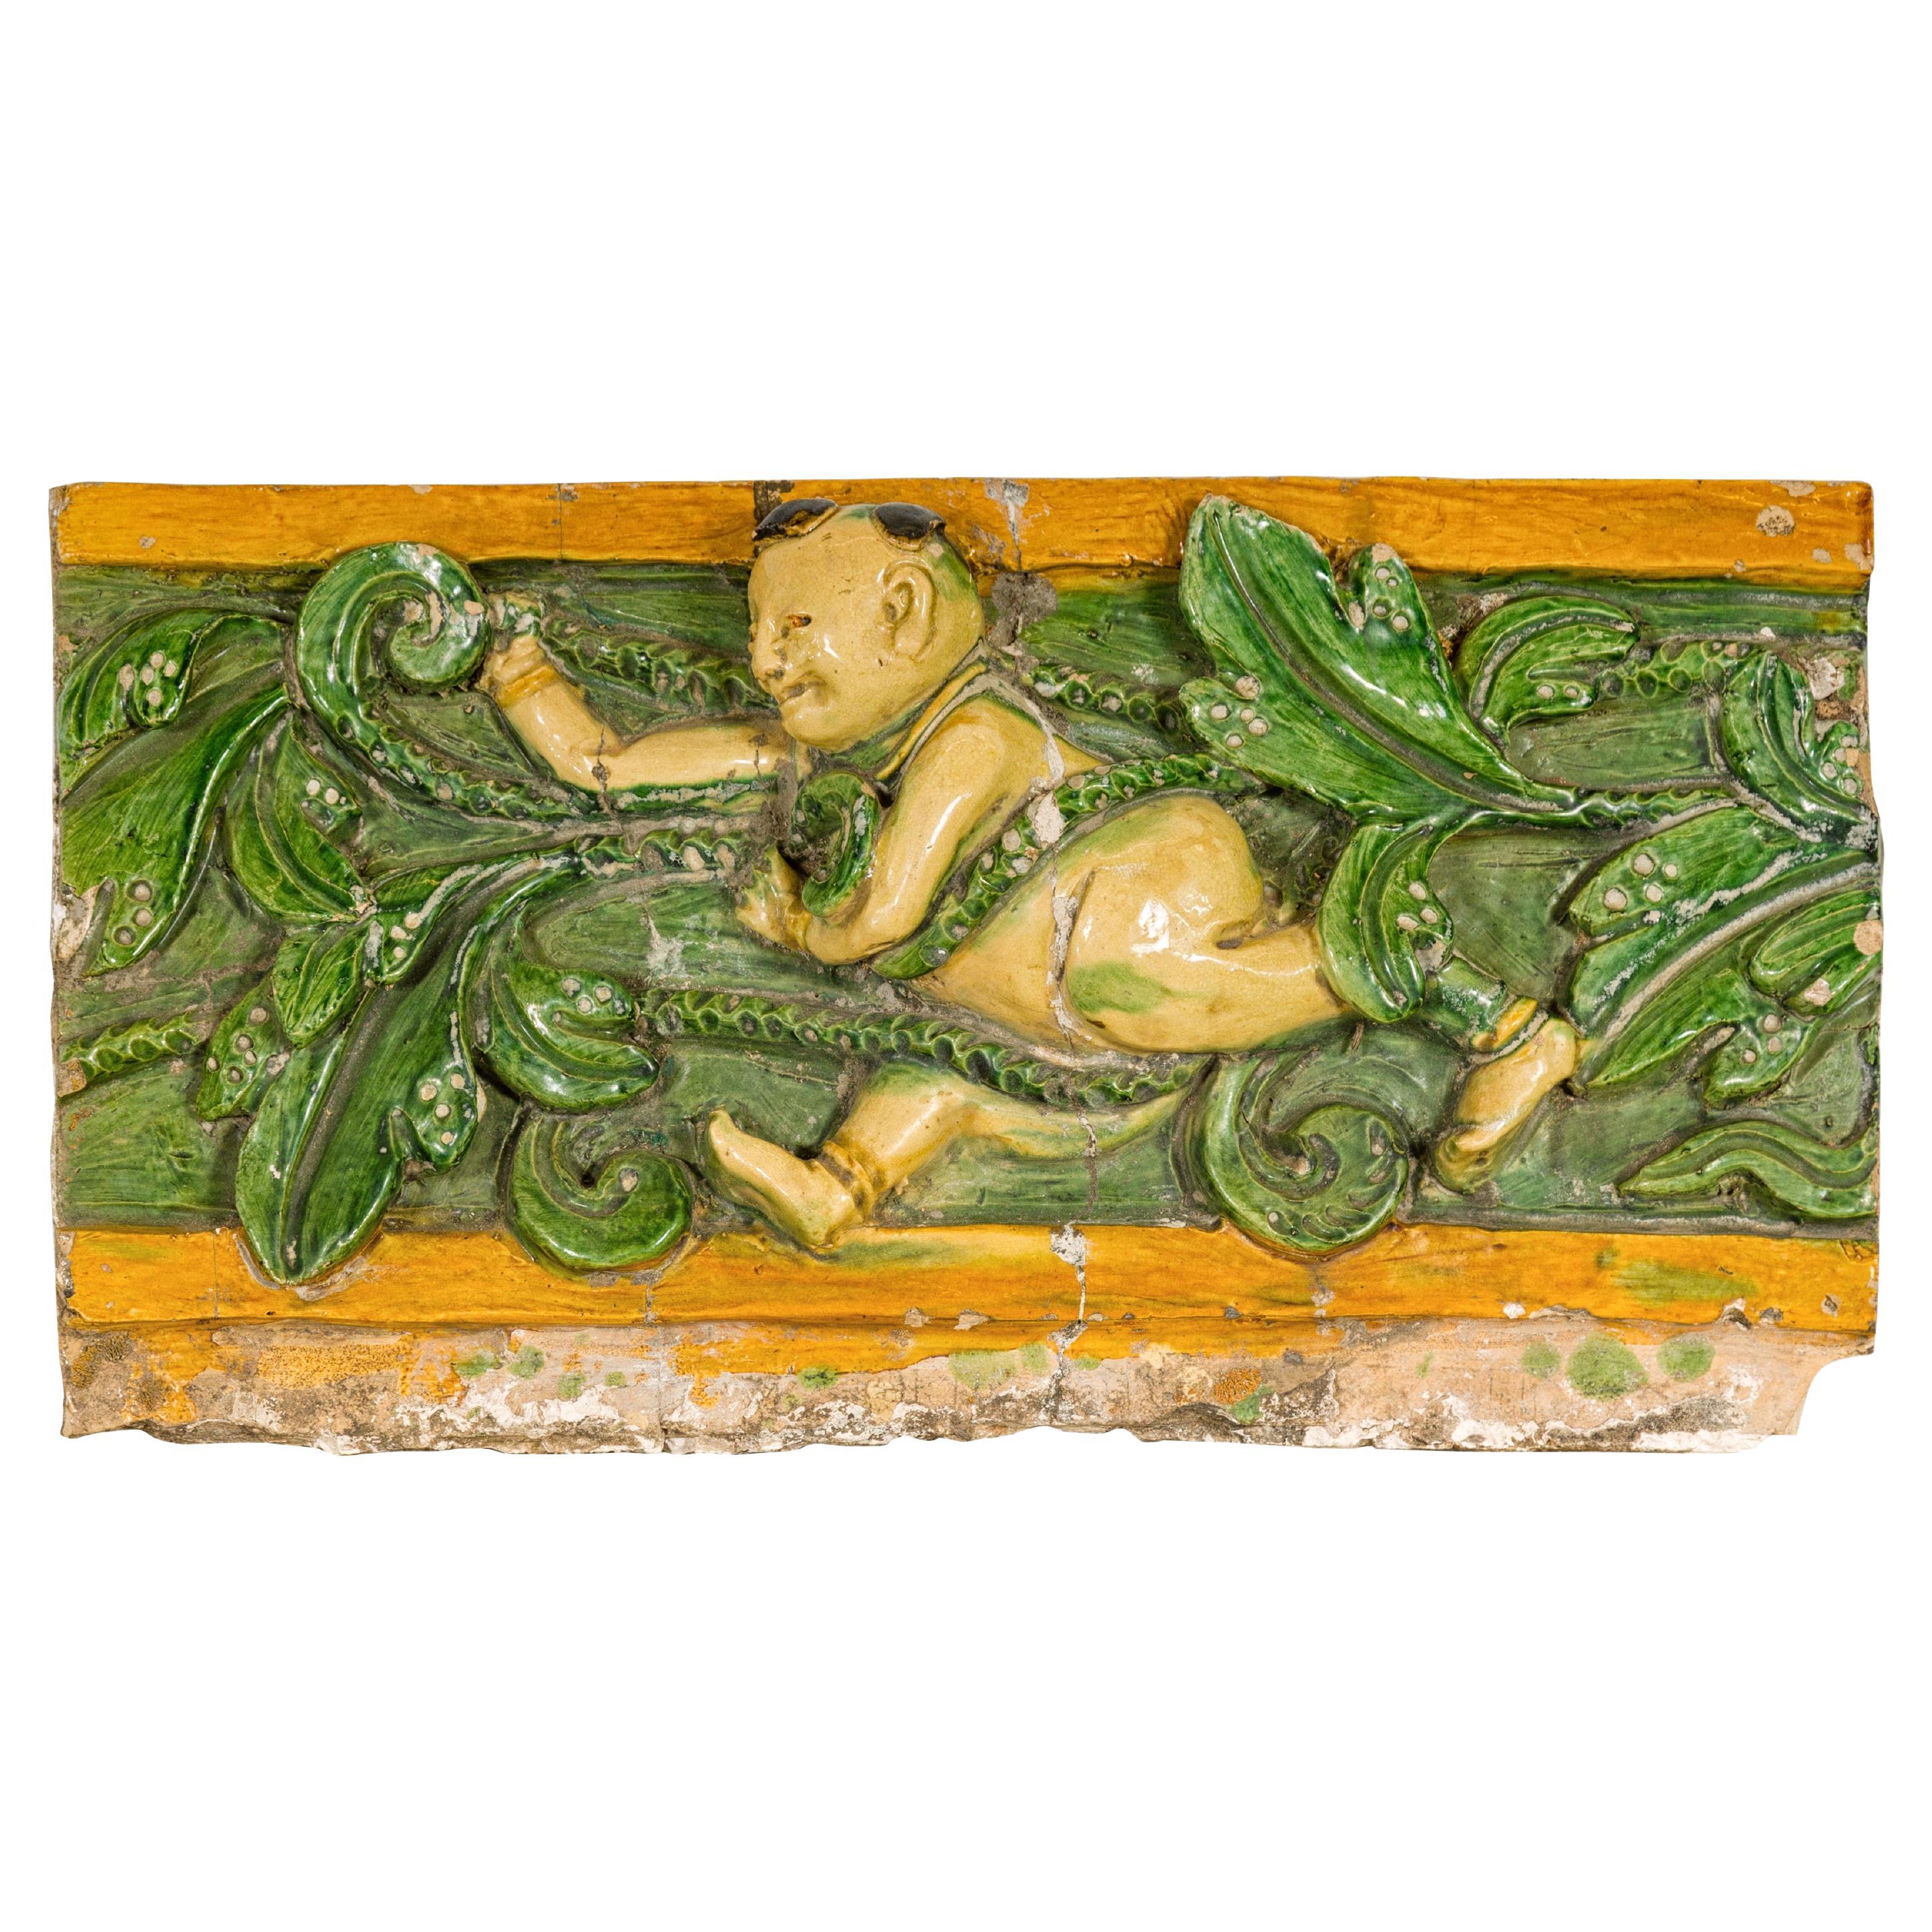 Qing Dynasty Tricolor Roof Fragment from a Temple Depicting a Boy Amidst Leaves For Sale